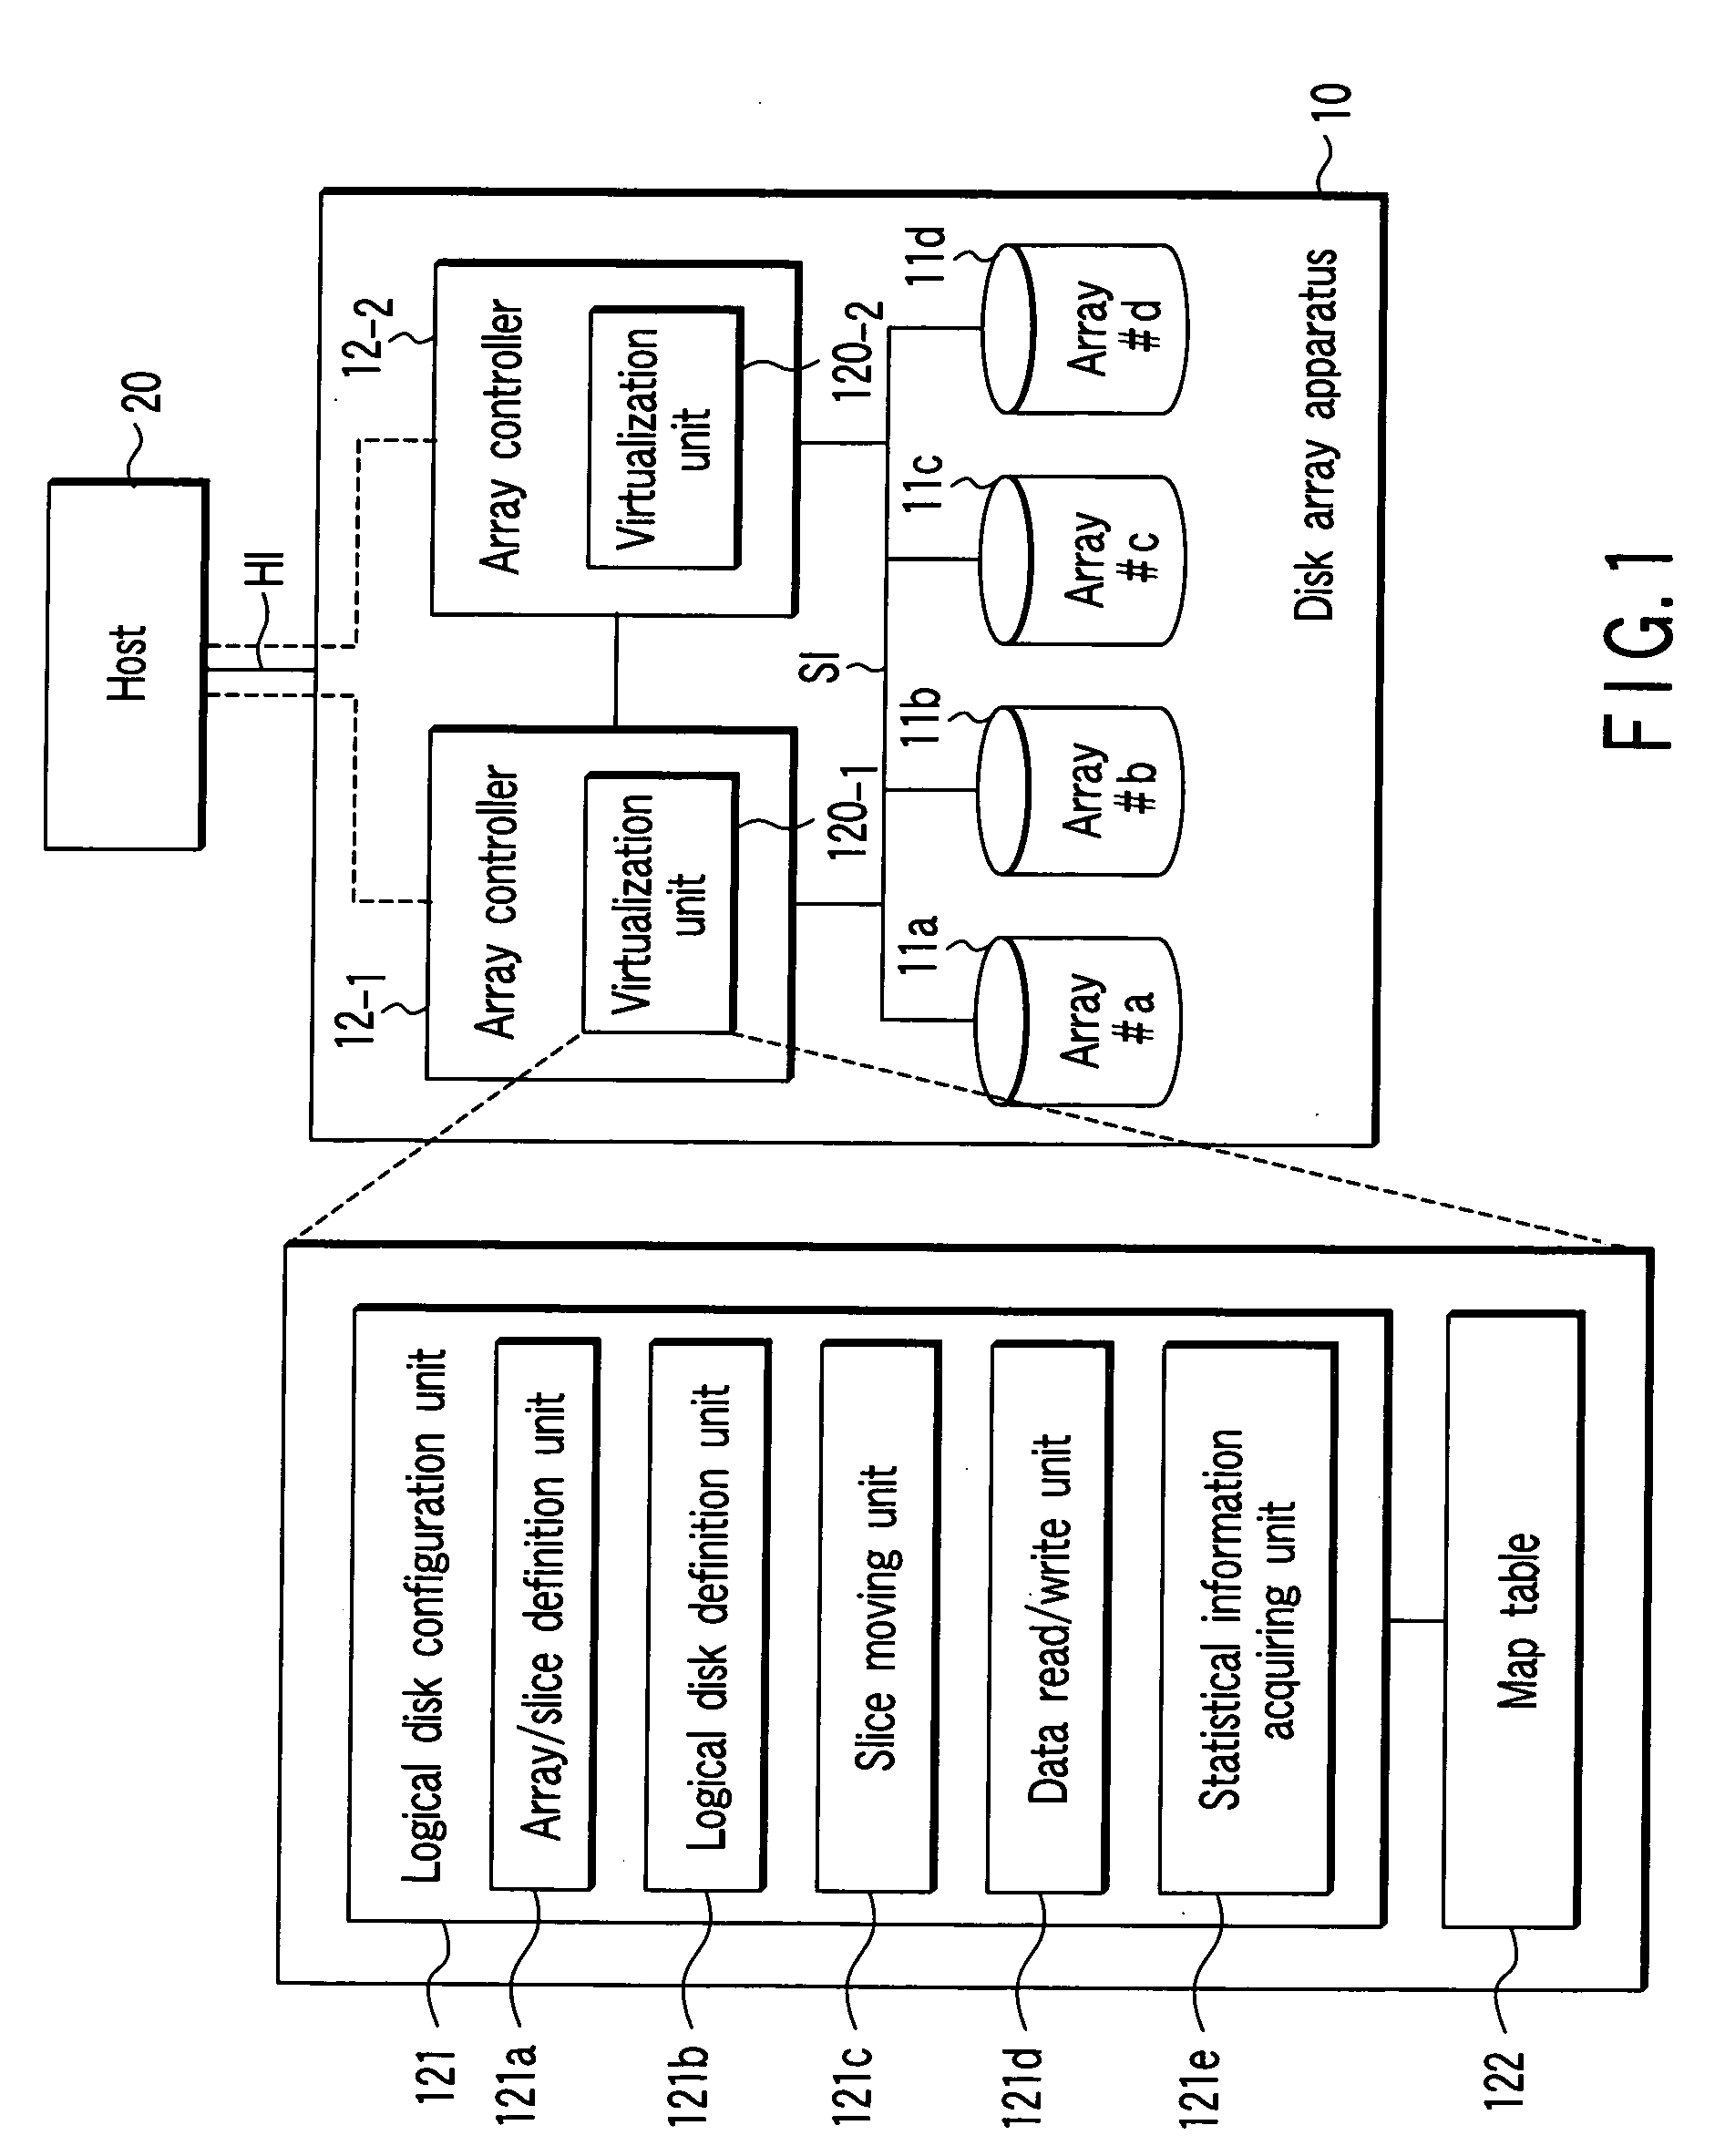 Logical disk management method and apparatus